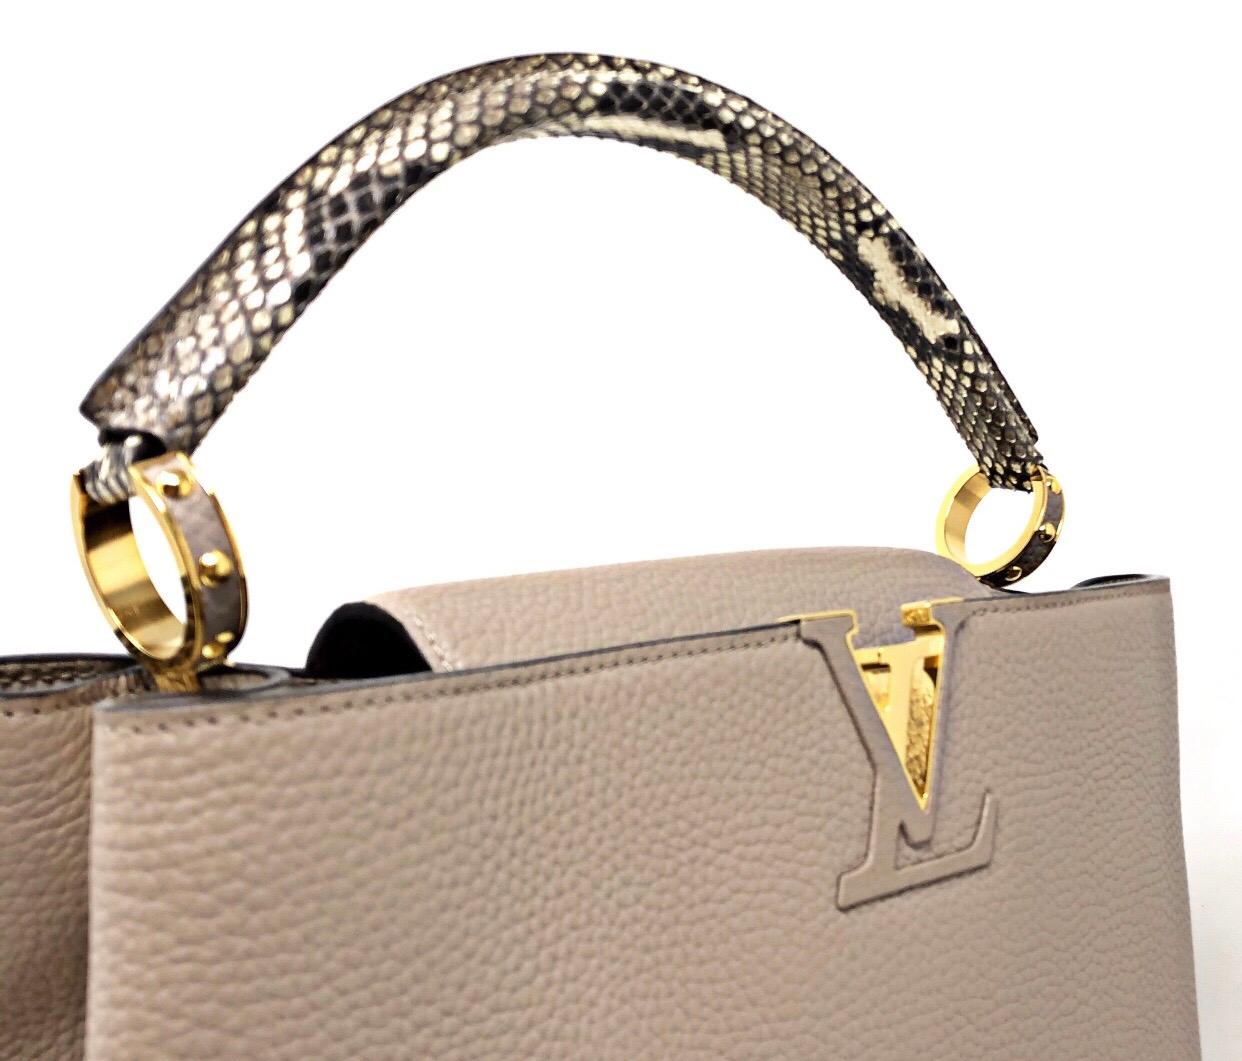 Reali Nice, Capucines bag brings chic sophistication to any look. Full-grain Taurillon leather combines with precious python to create a luxurious handbag accented with heritage details: the LV initials, the distinctive side rings and the subtle